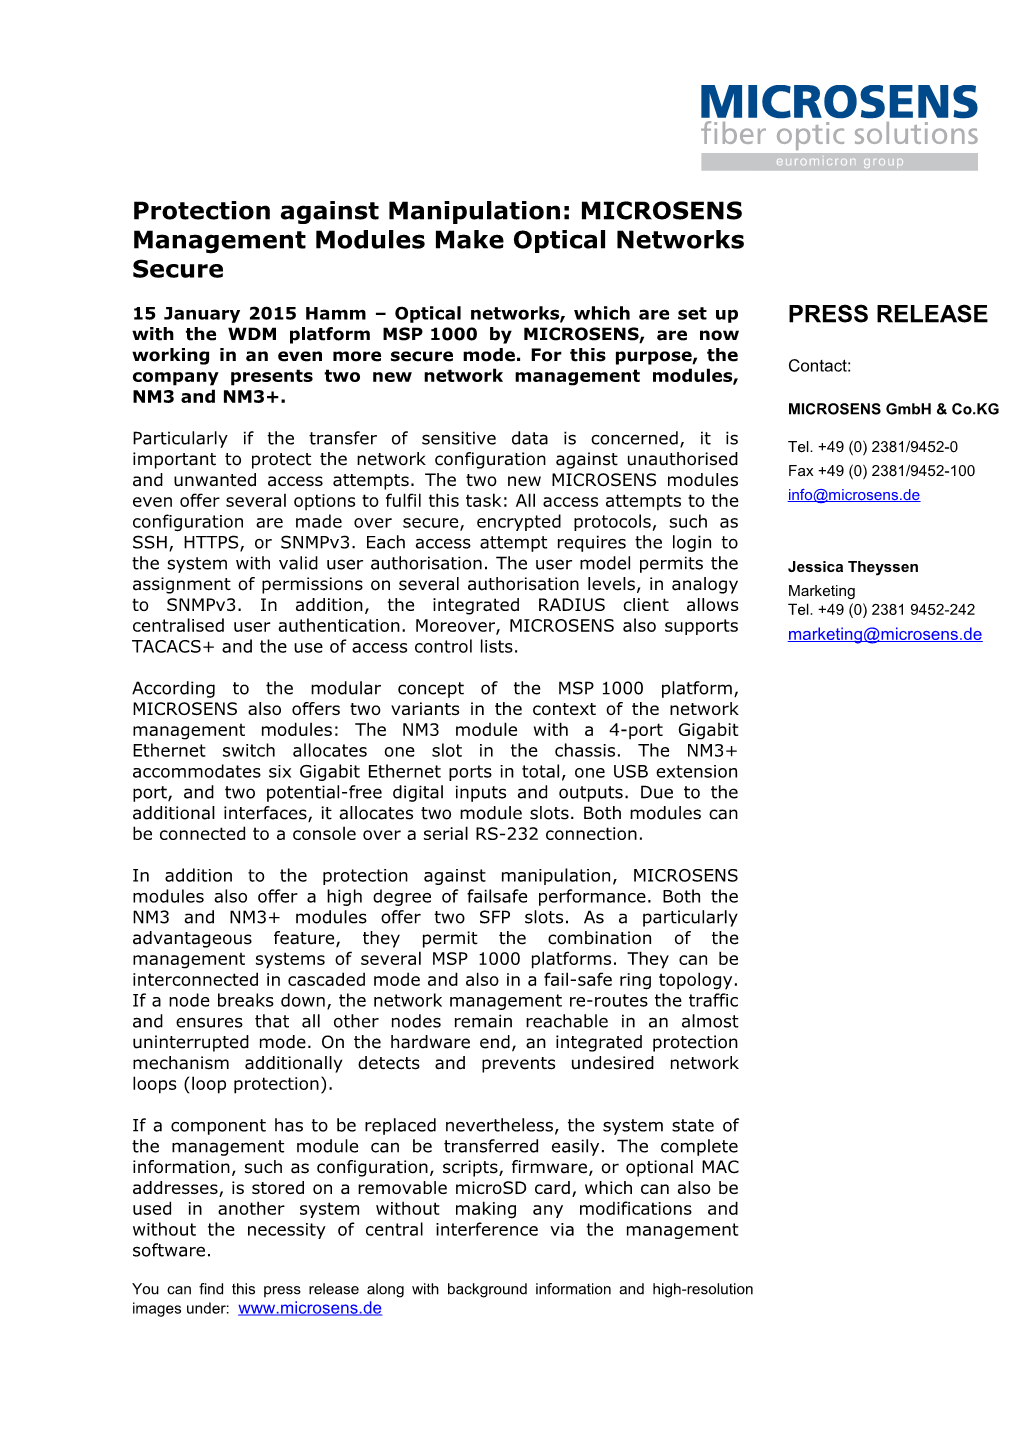 Protection Against Manipulation: MICROSENS Management Modules Make Optical Networks Secure